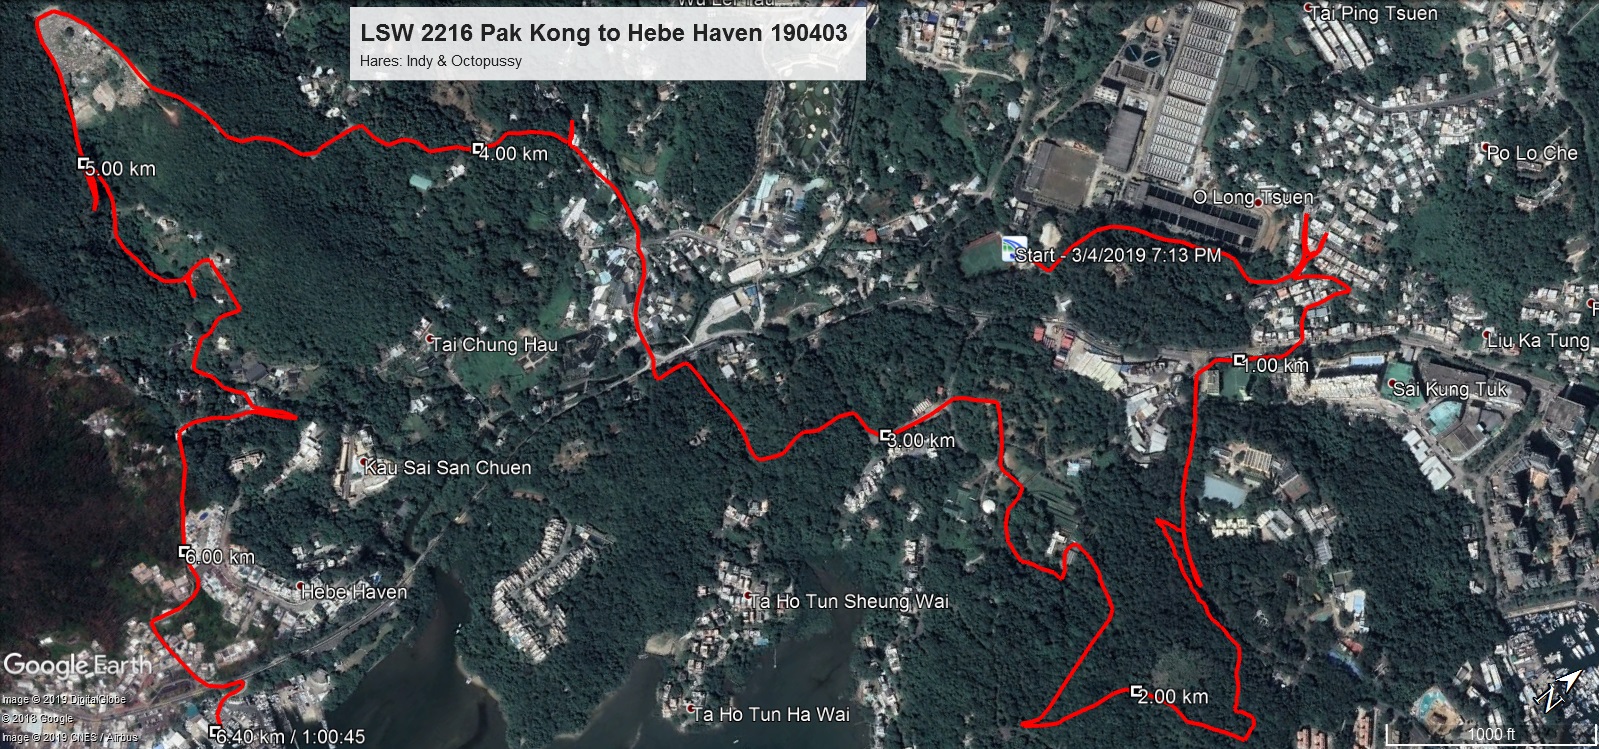 Pak Kong to Hebe Haven 190403